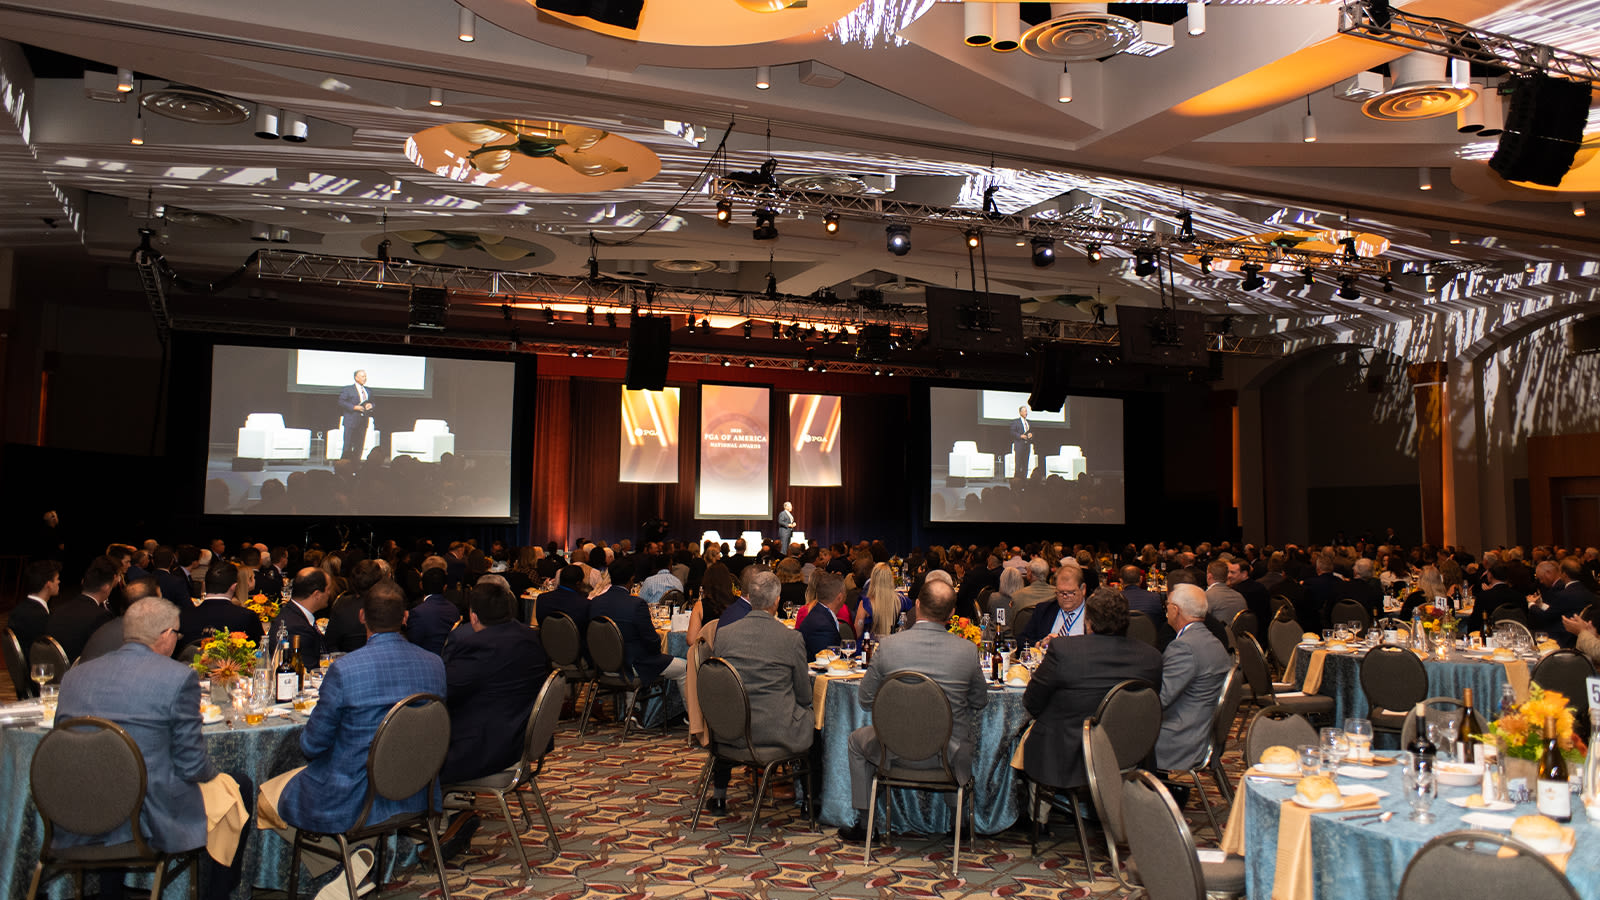 PGA of America National Awards Ceremony to Kickoff the 106th PGA Annual Meeting in Phoenix